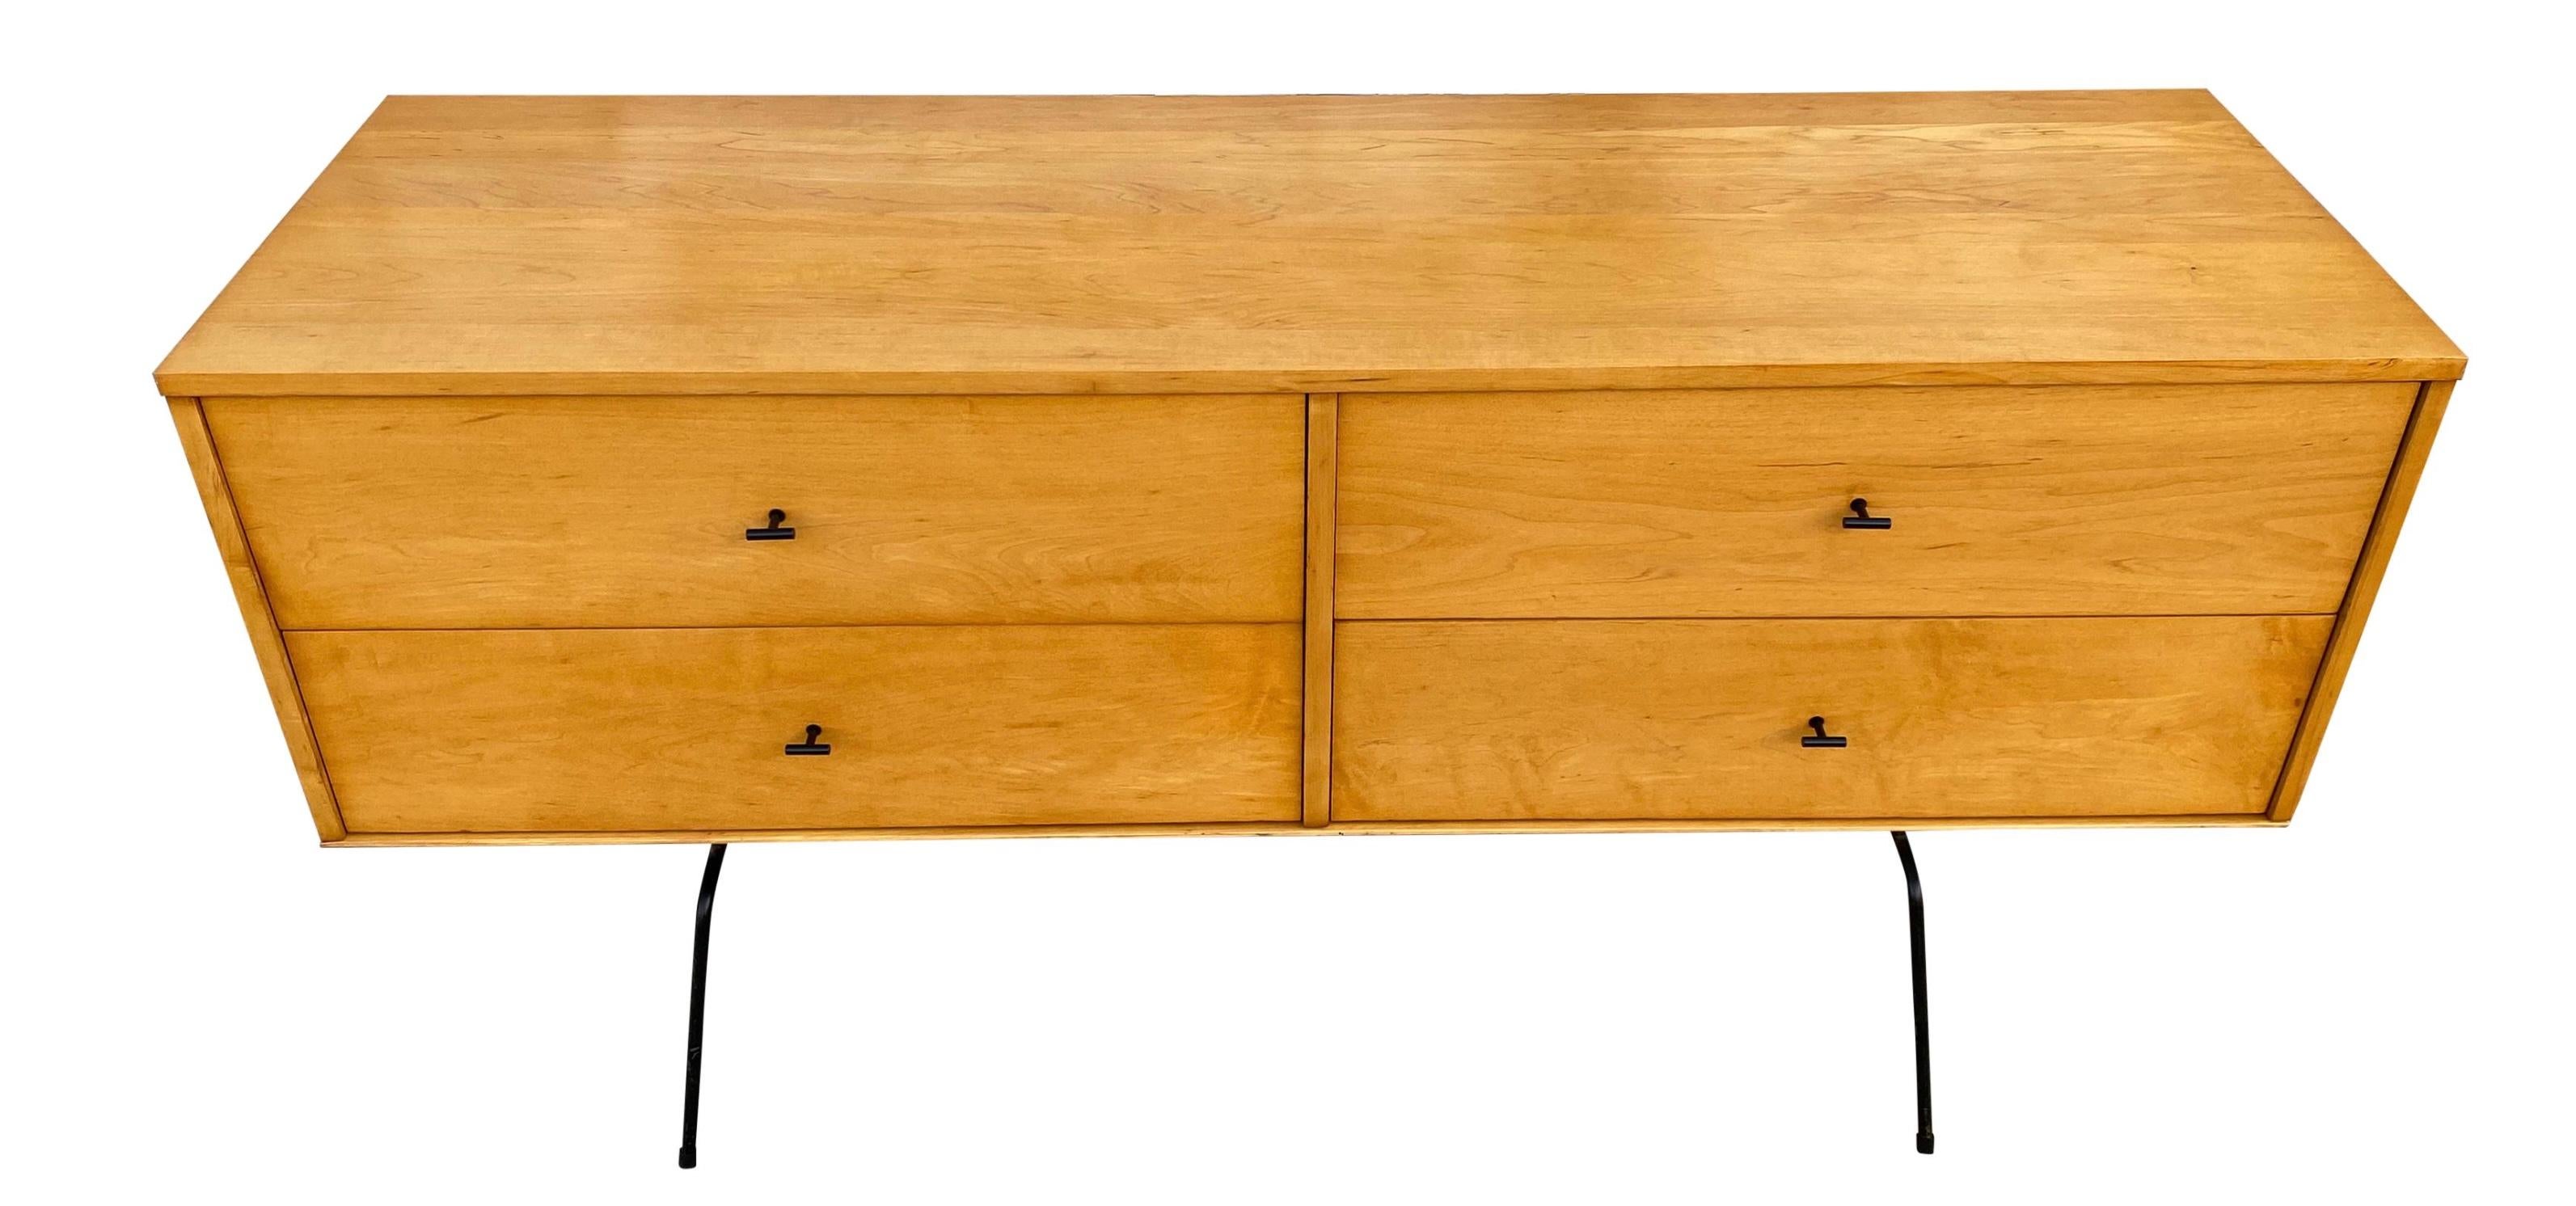 Rare midcentury low dresser credenza by Paul McCobb circa 1950 Planner Group #1504 with 4 low drawers - Solid maple construction has a raw blonde maple lacquered finish. All original Black Steel T Pulls. Sits on a 60